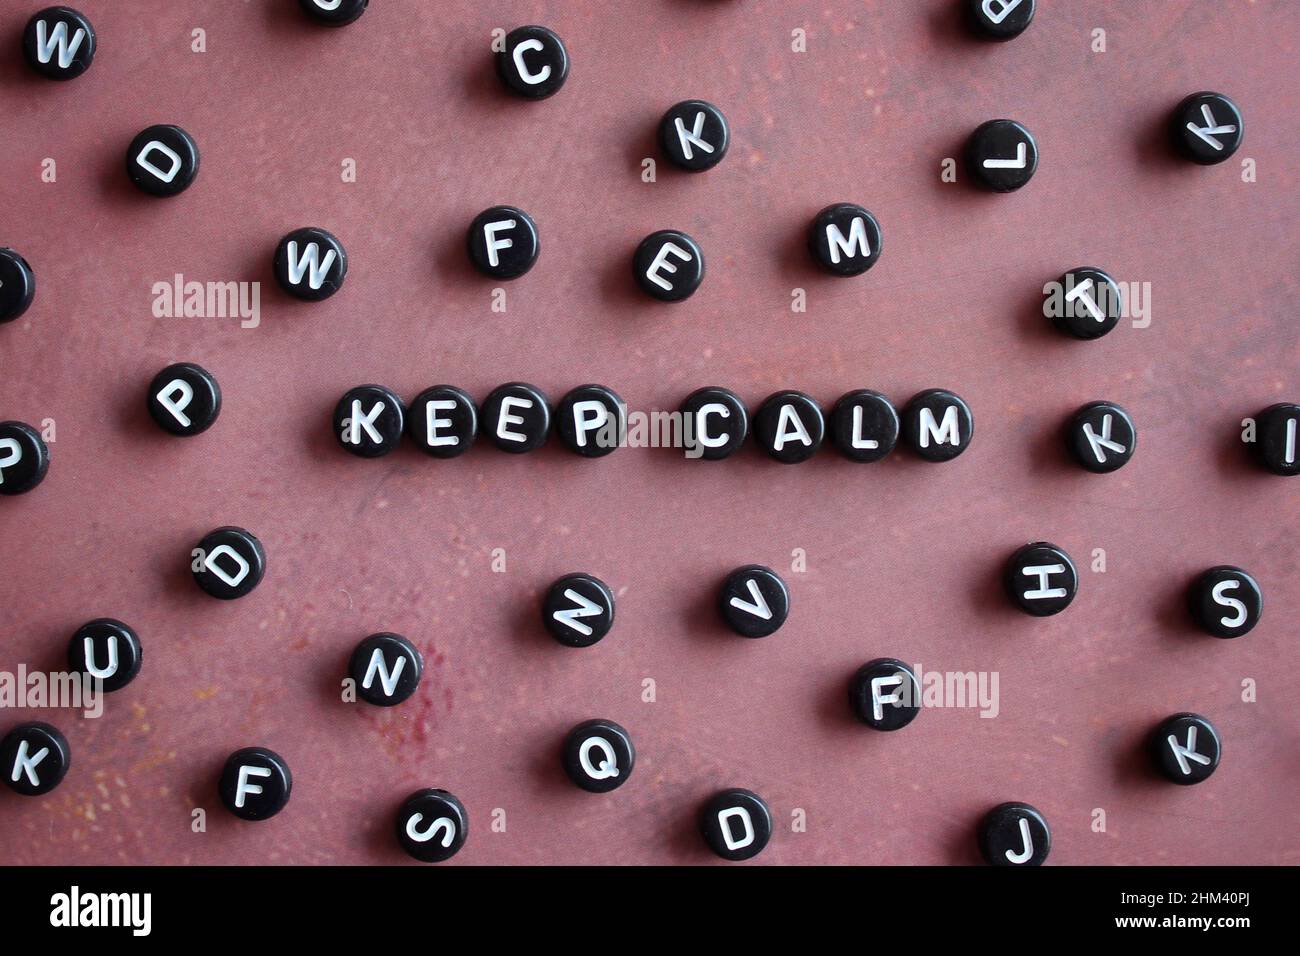 Top view image of alphabet beads with text KEEP CALM. Stock Photo